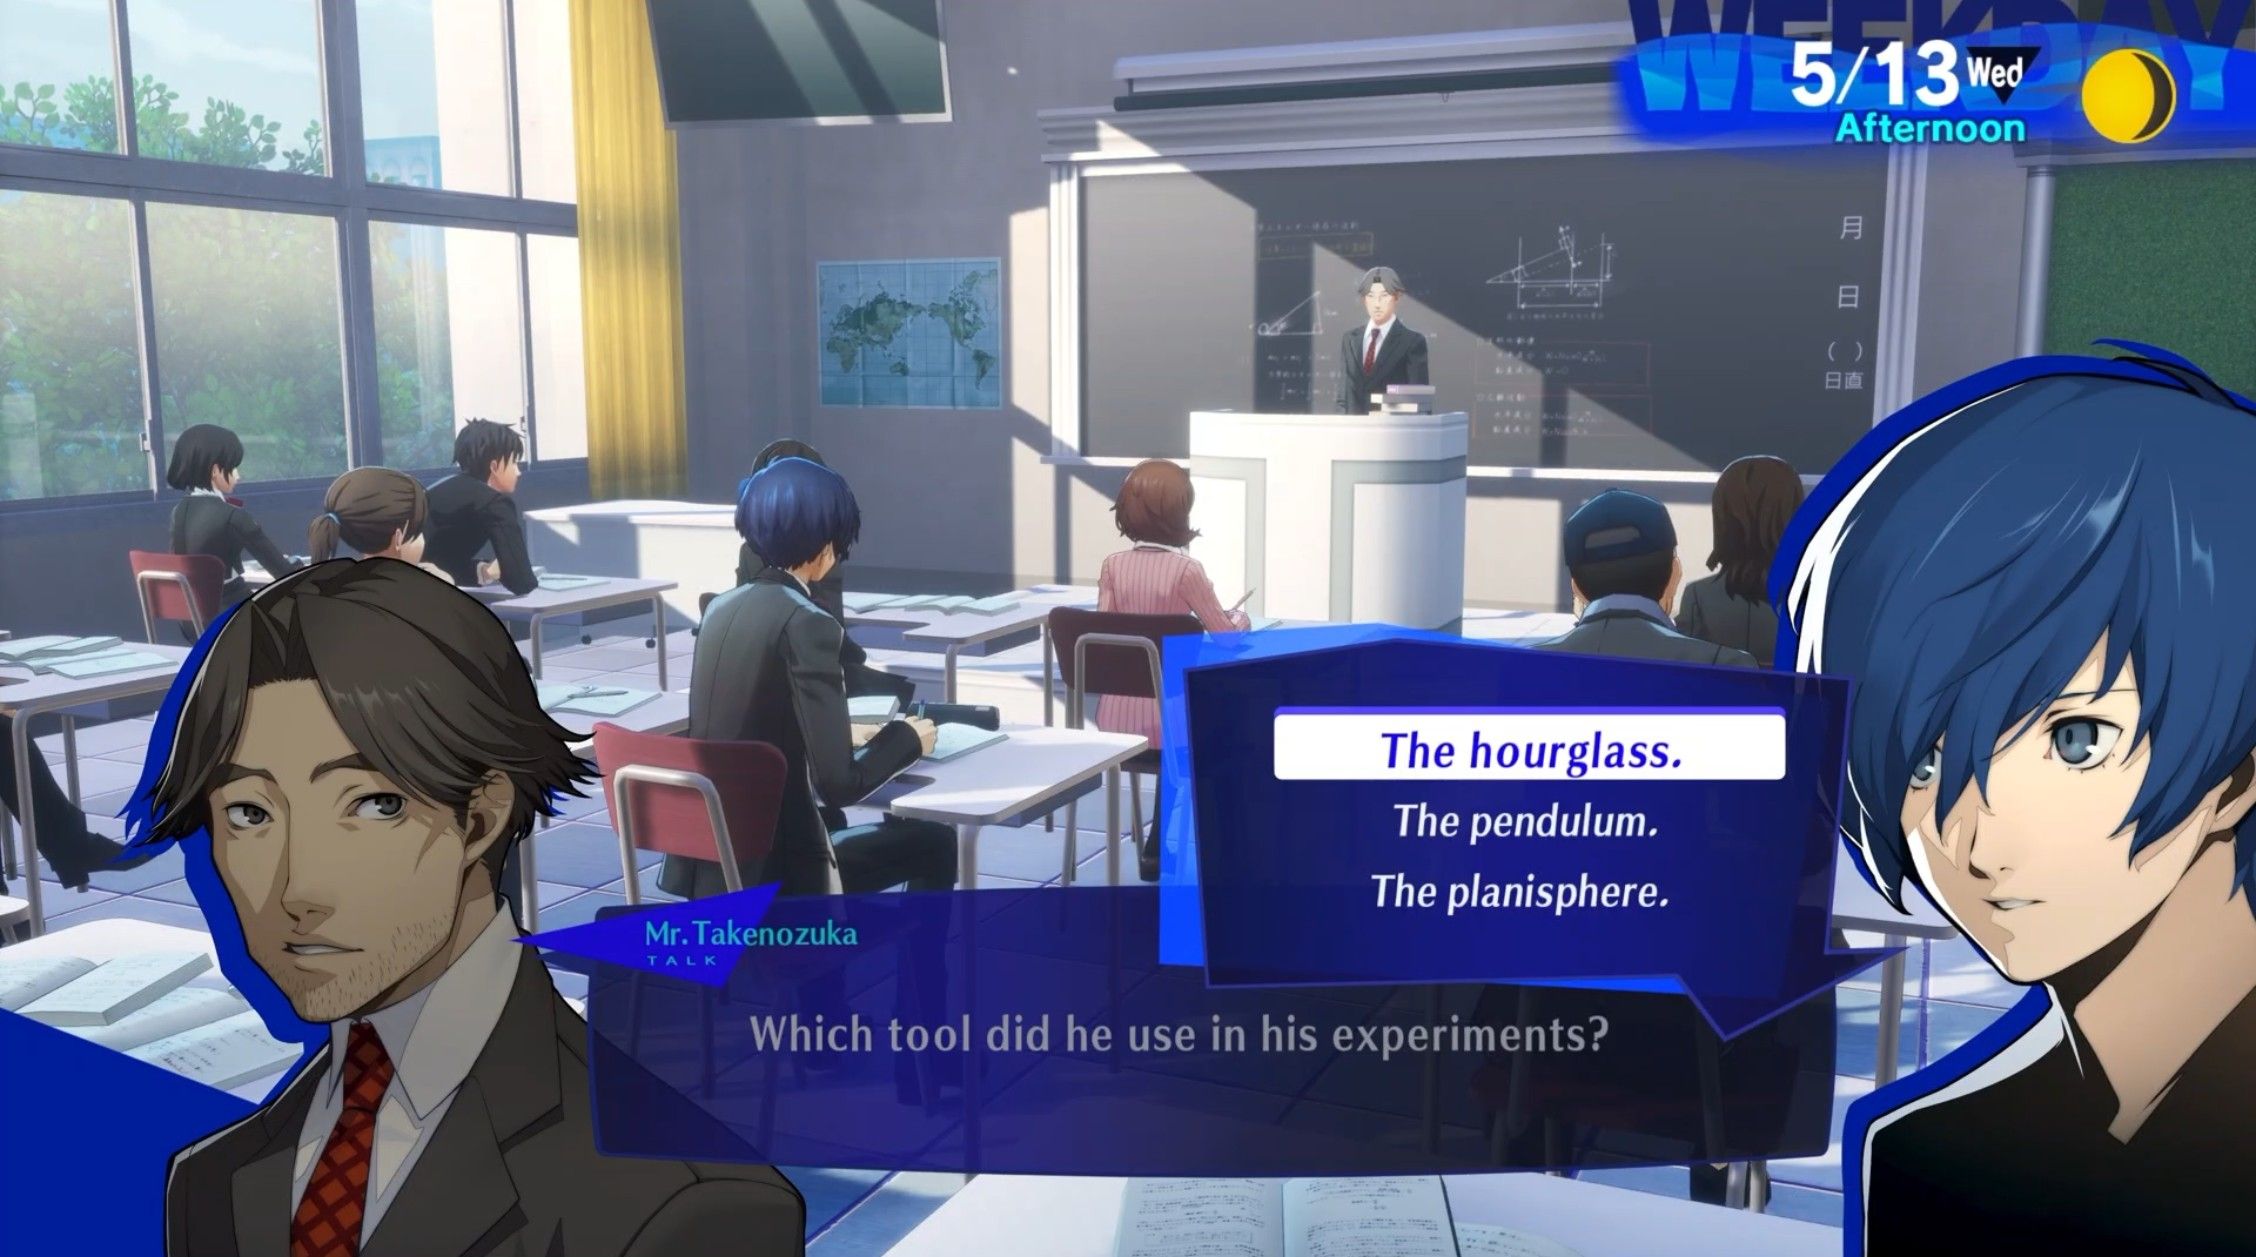 may answering mr takenozuka about the tool foucault used in experiments p3r class answers exams persona 3 reload